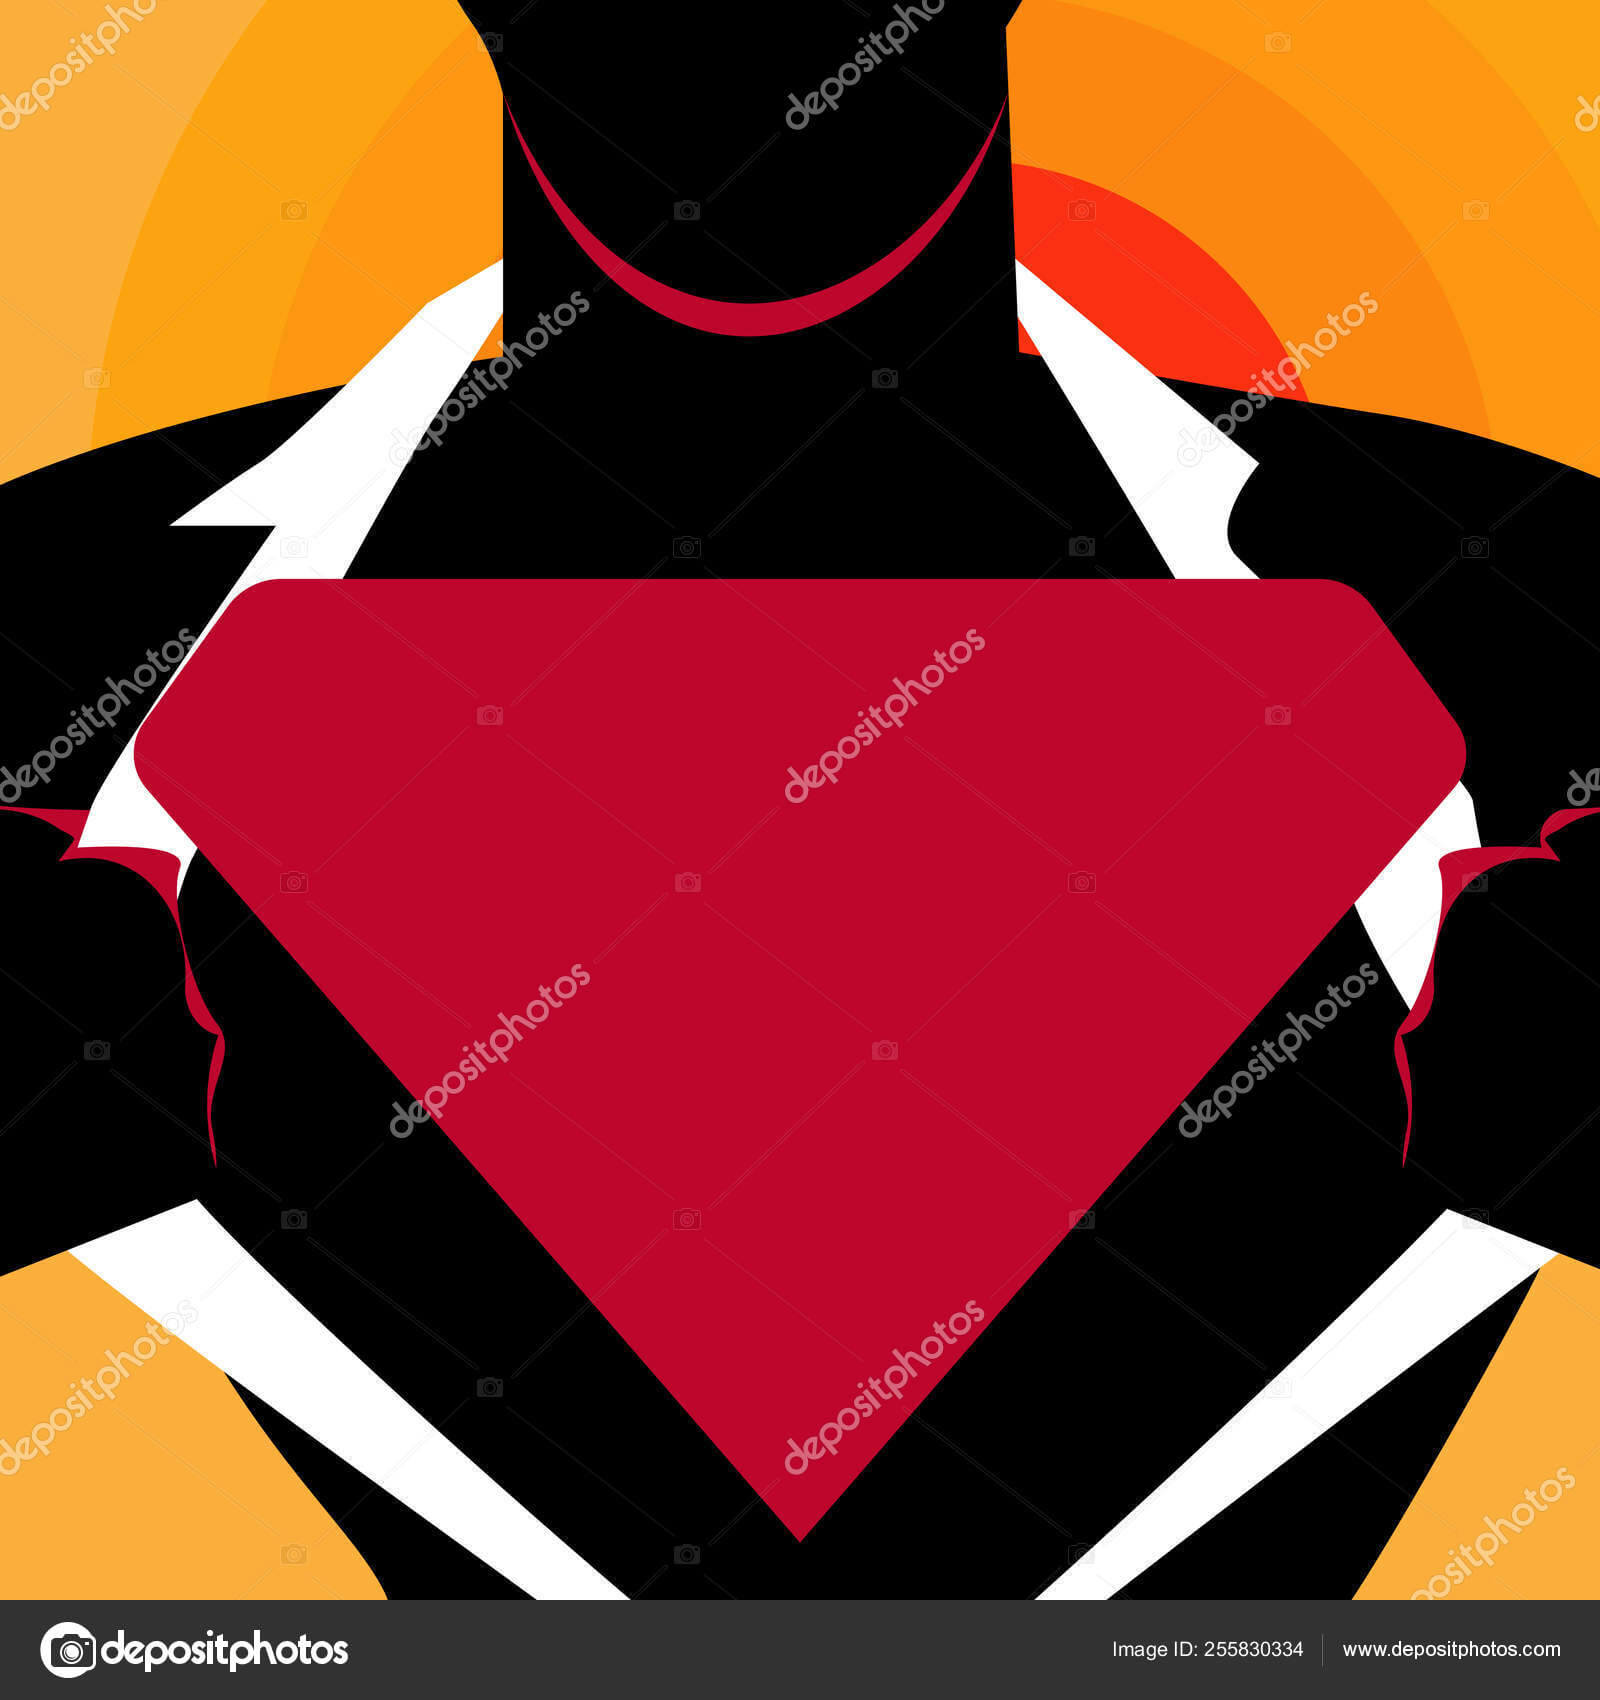 Man In Superman Pose Opening Shirt To Reveal Blank With Blank Superman Logo Template